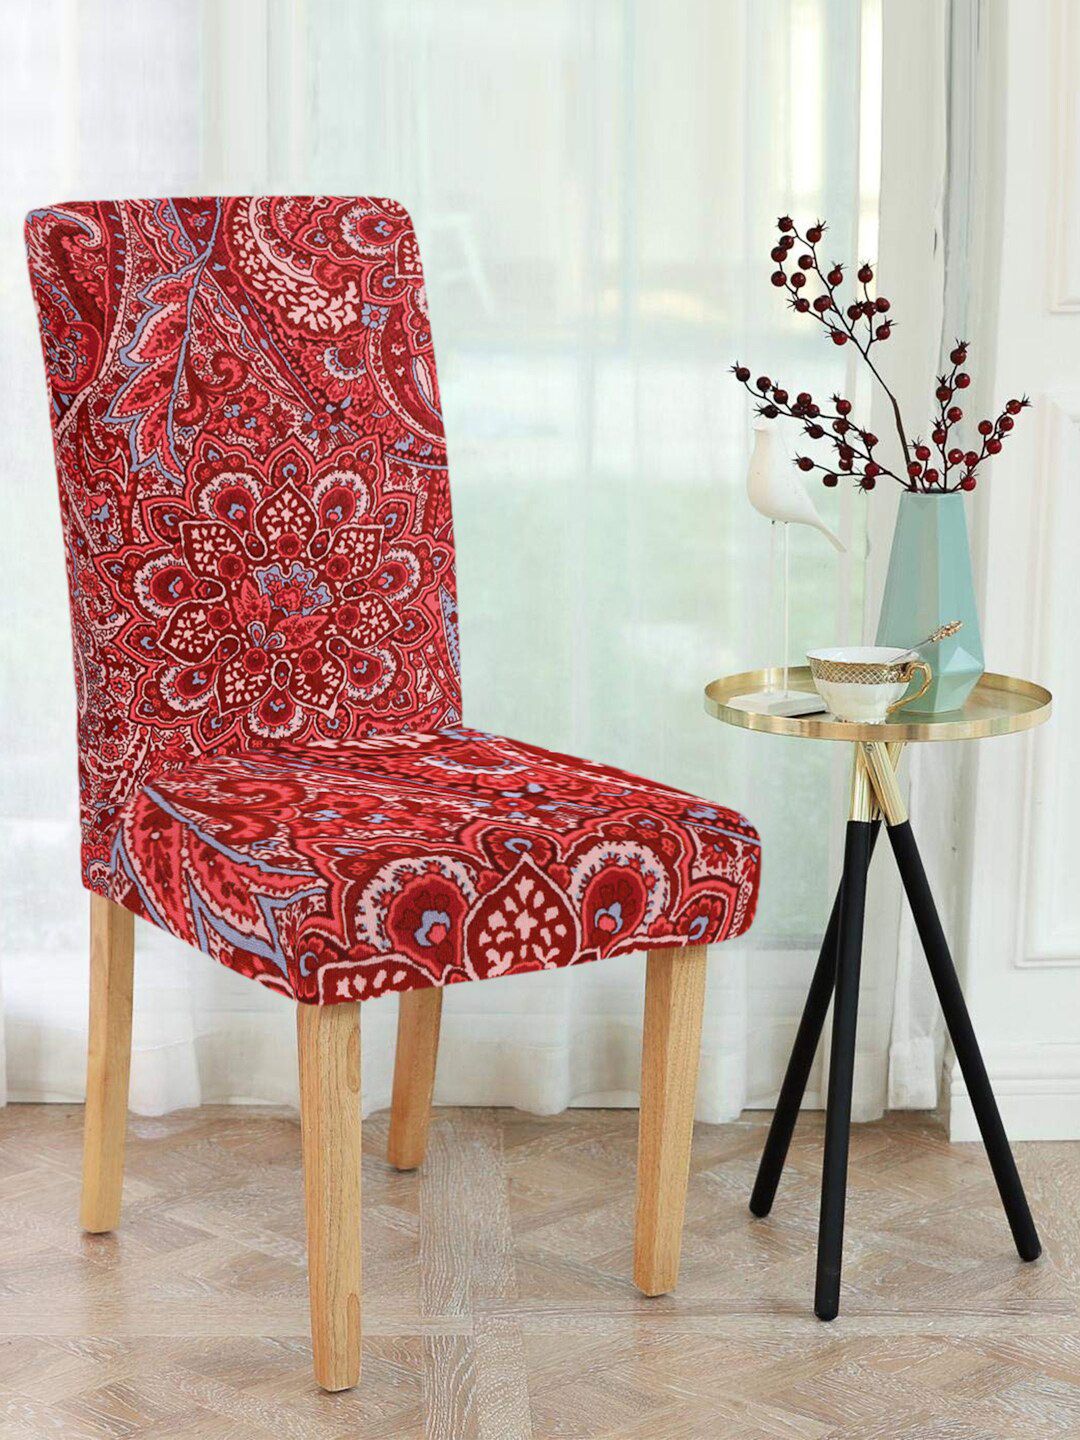 Cortina Set Of 6 Maroon & Pink Printed Chair Covers Price in India